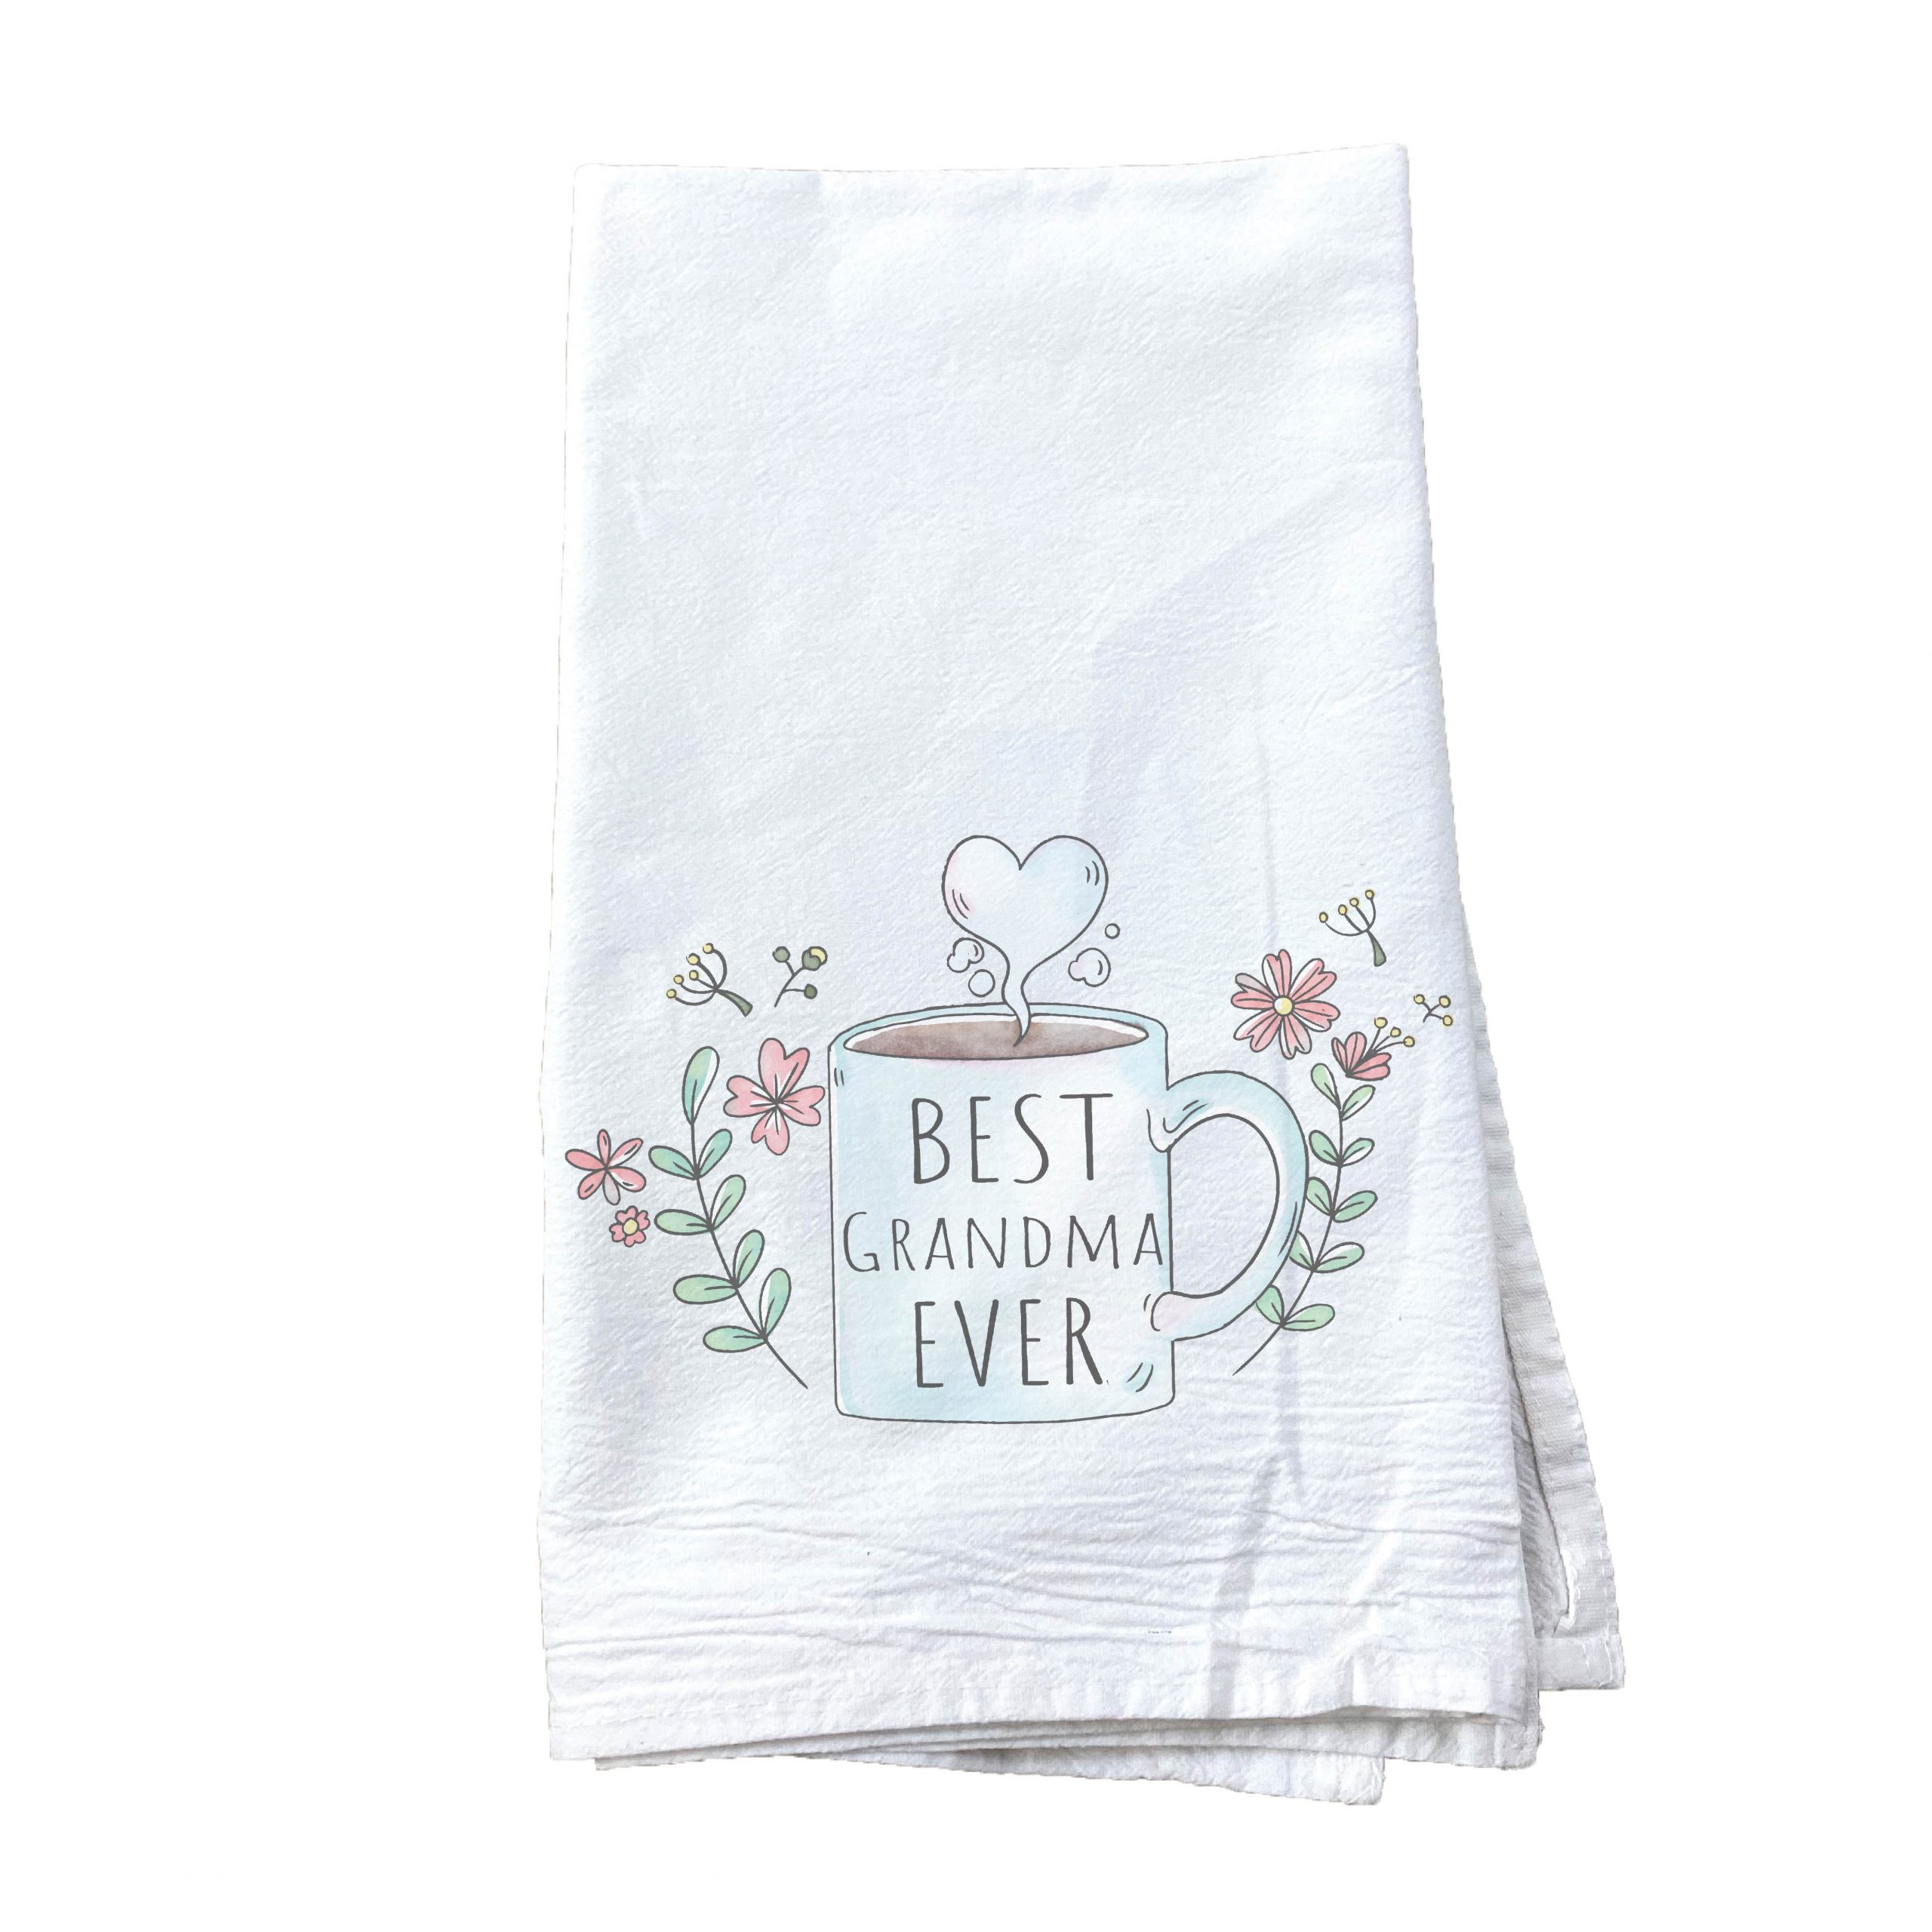 https://cottoncreations.com/content/uploads/2021/04/Best-grandma-cup-on-towel-01-scaled.jpg